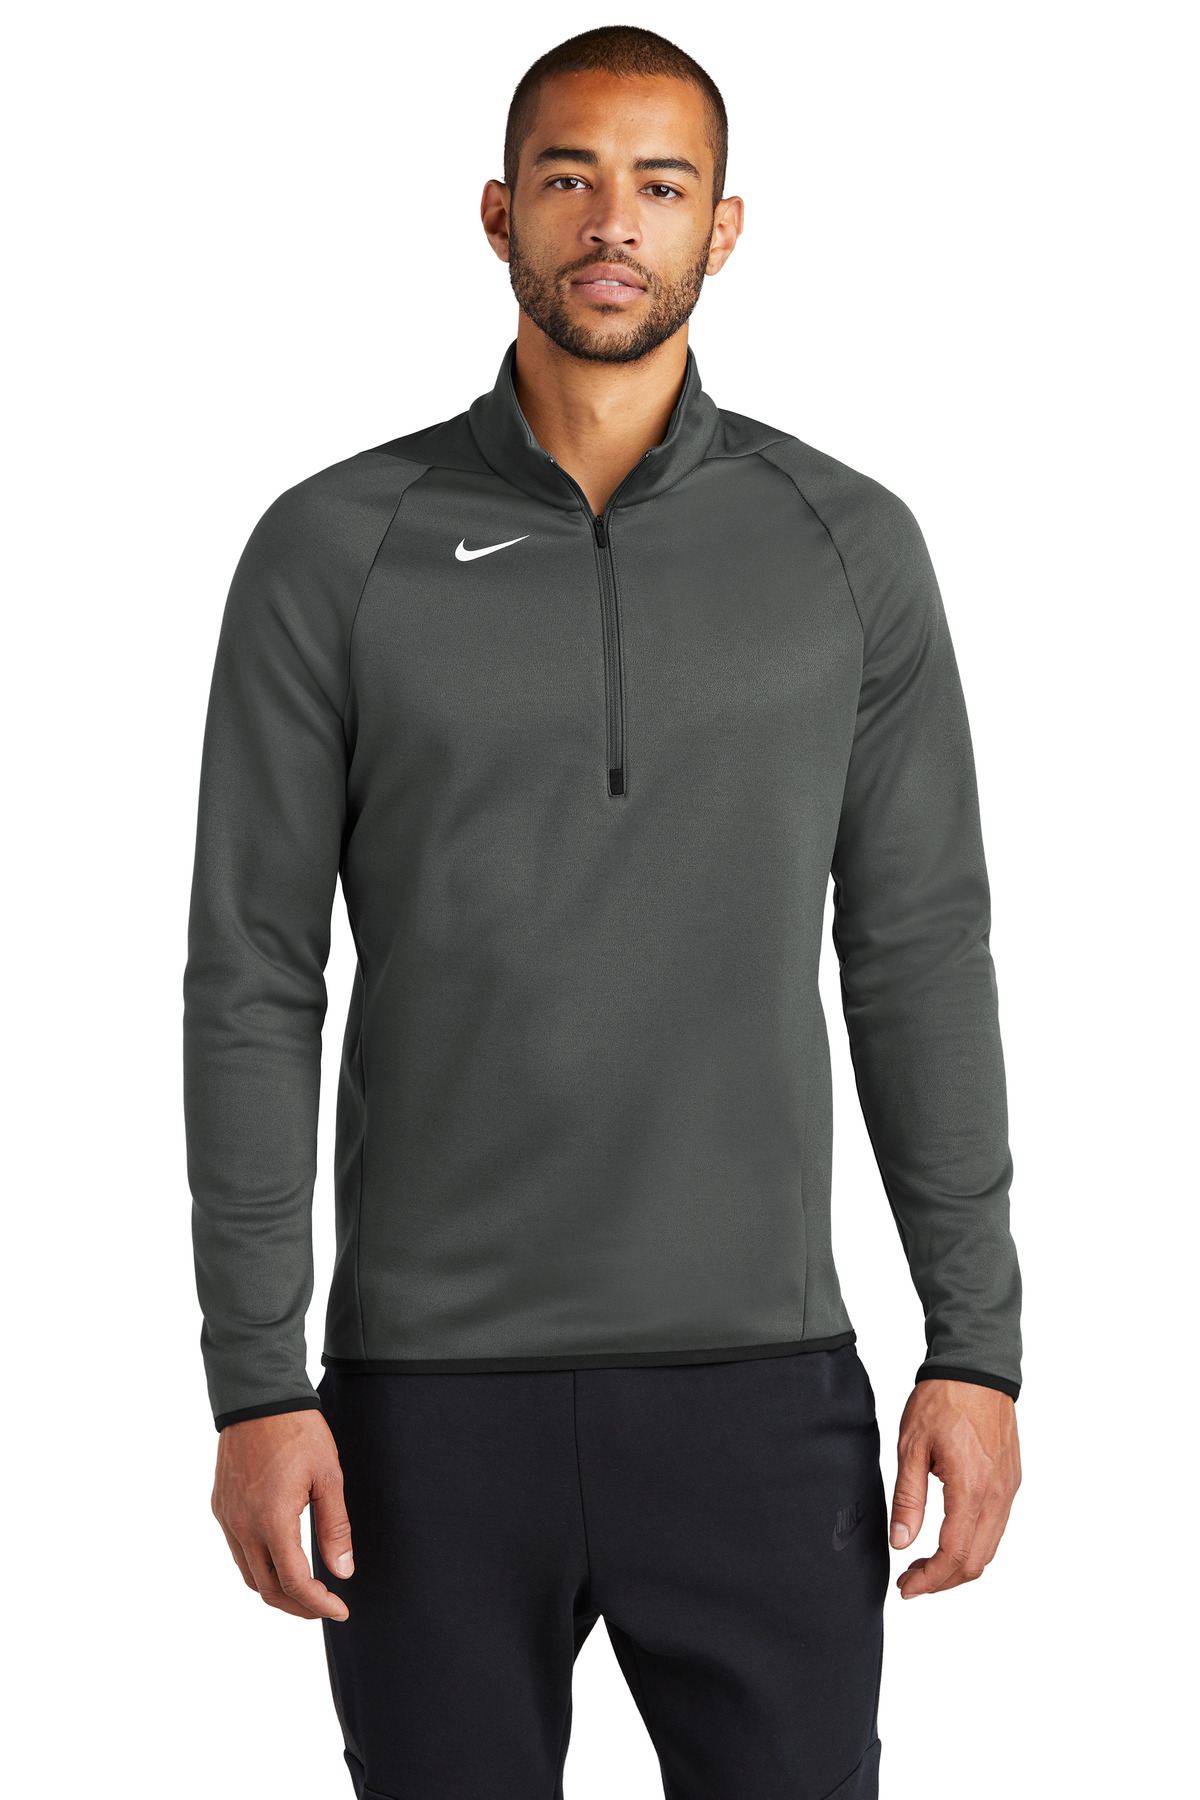 LIMITED EDITION Nike Therma-FIT 1/4-Zip Fleec-